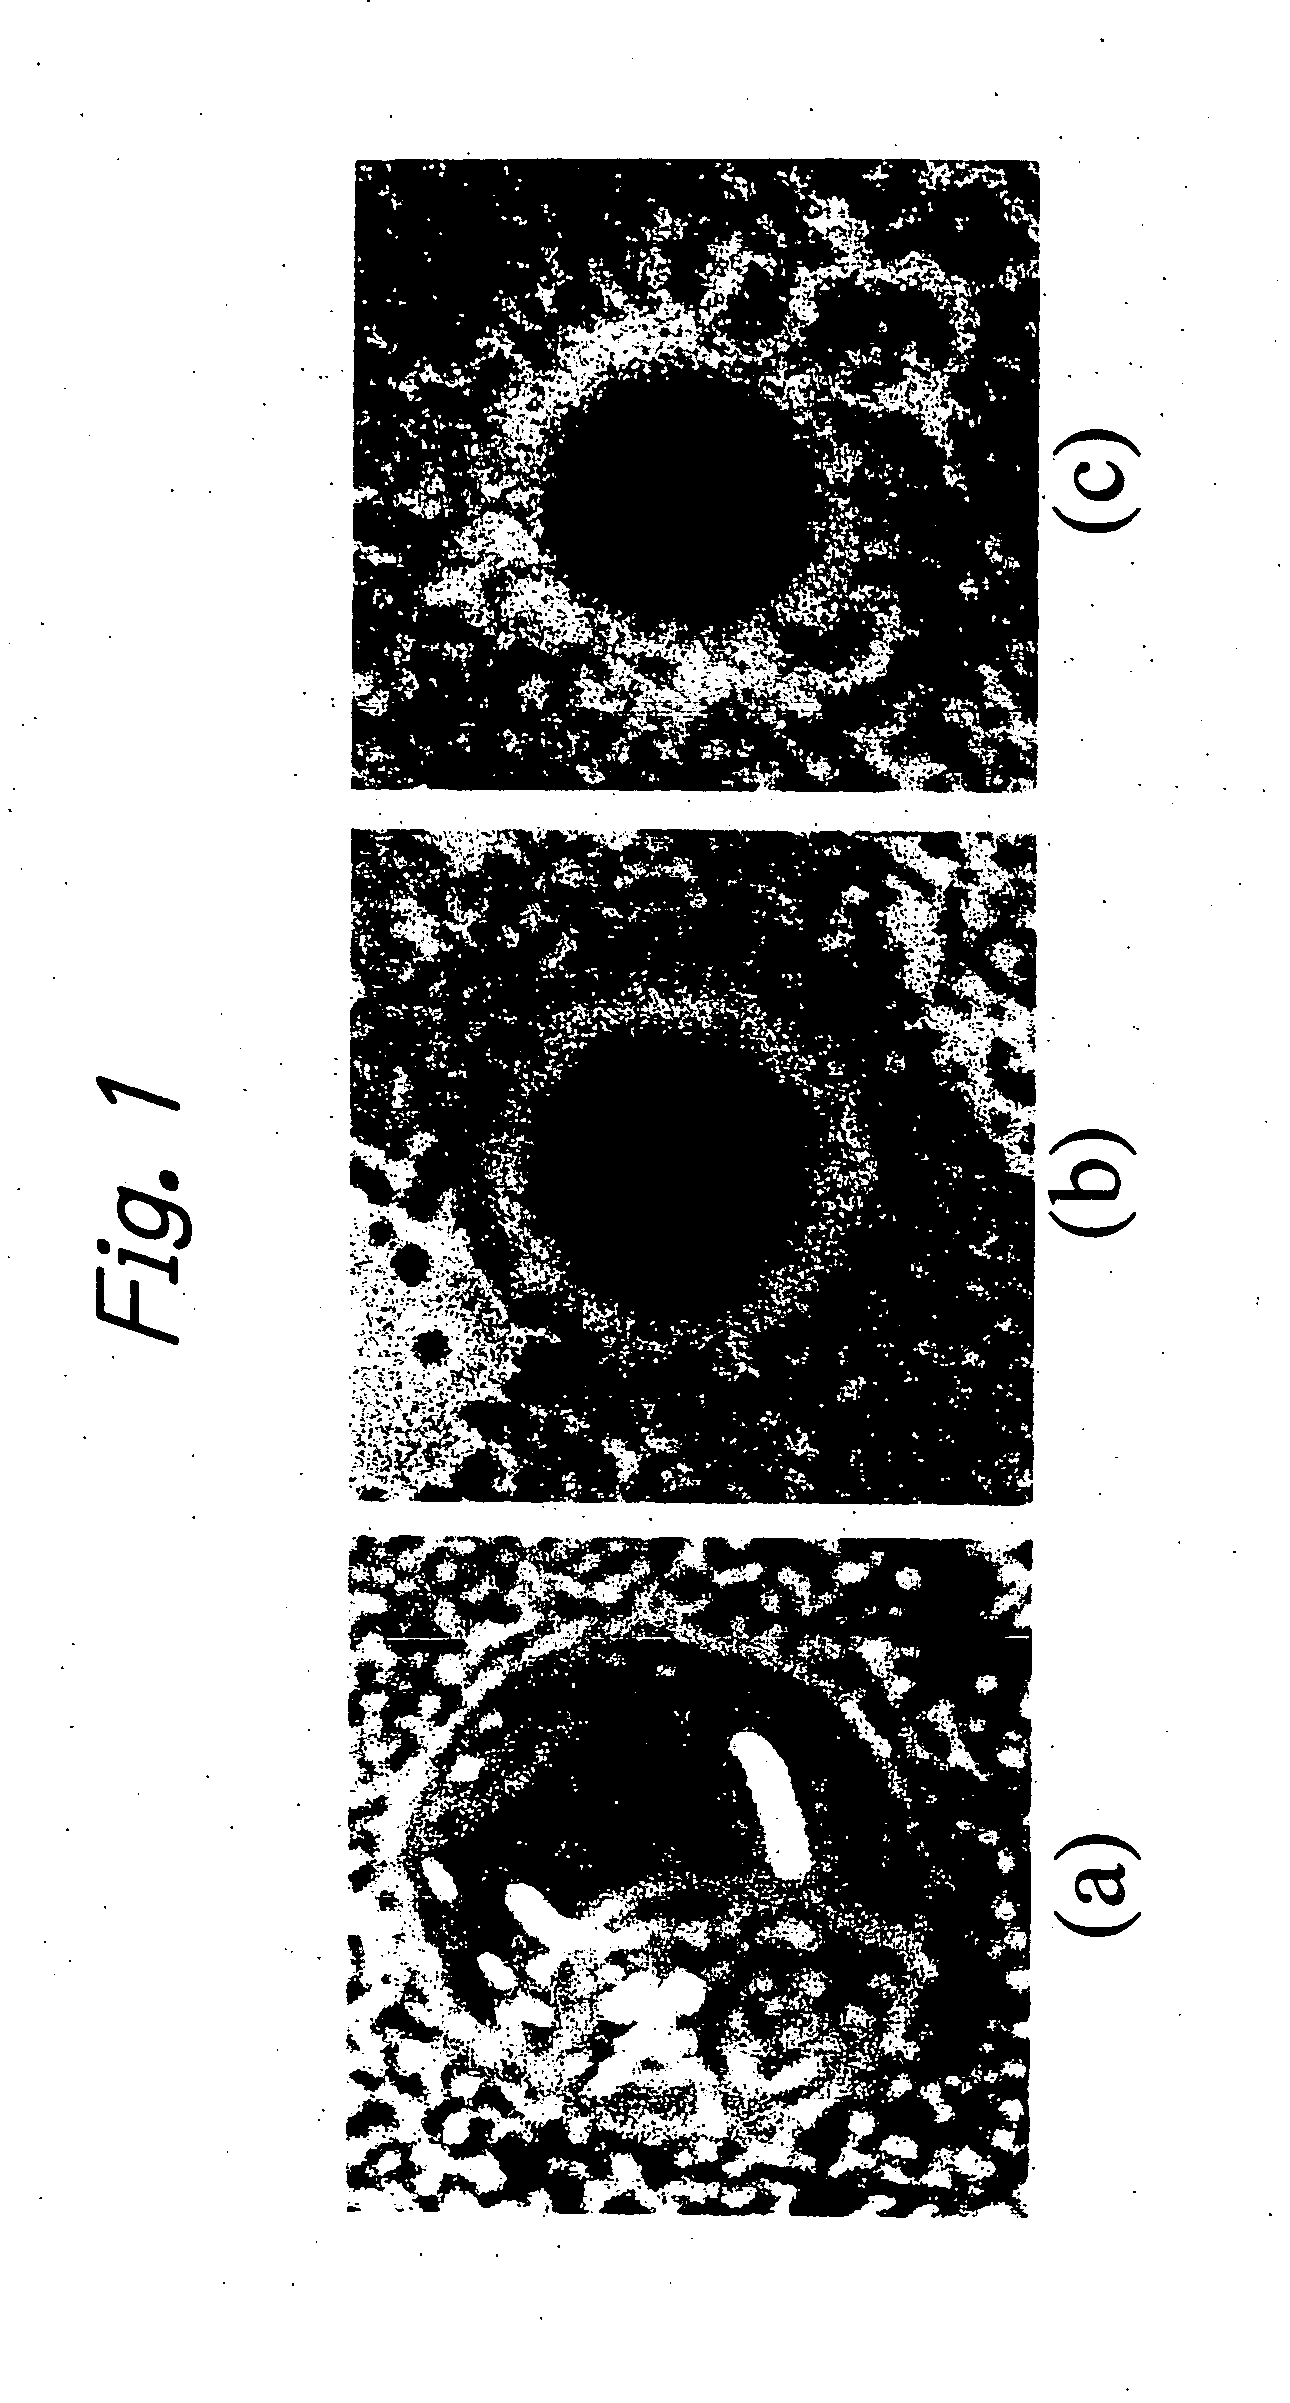 Process for producing chitin derivatives and/or chitosan derivatives having a crosslinked structure